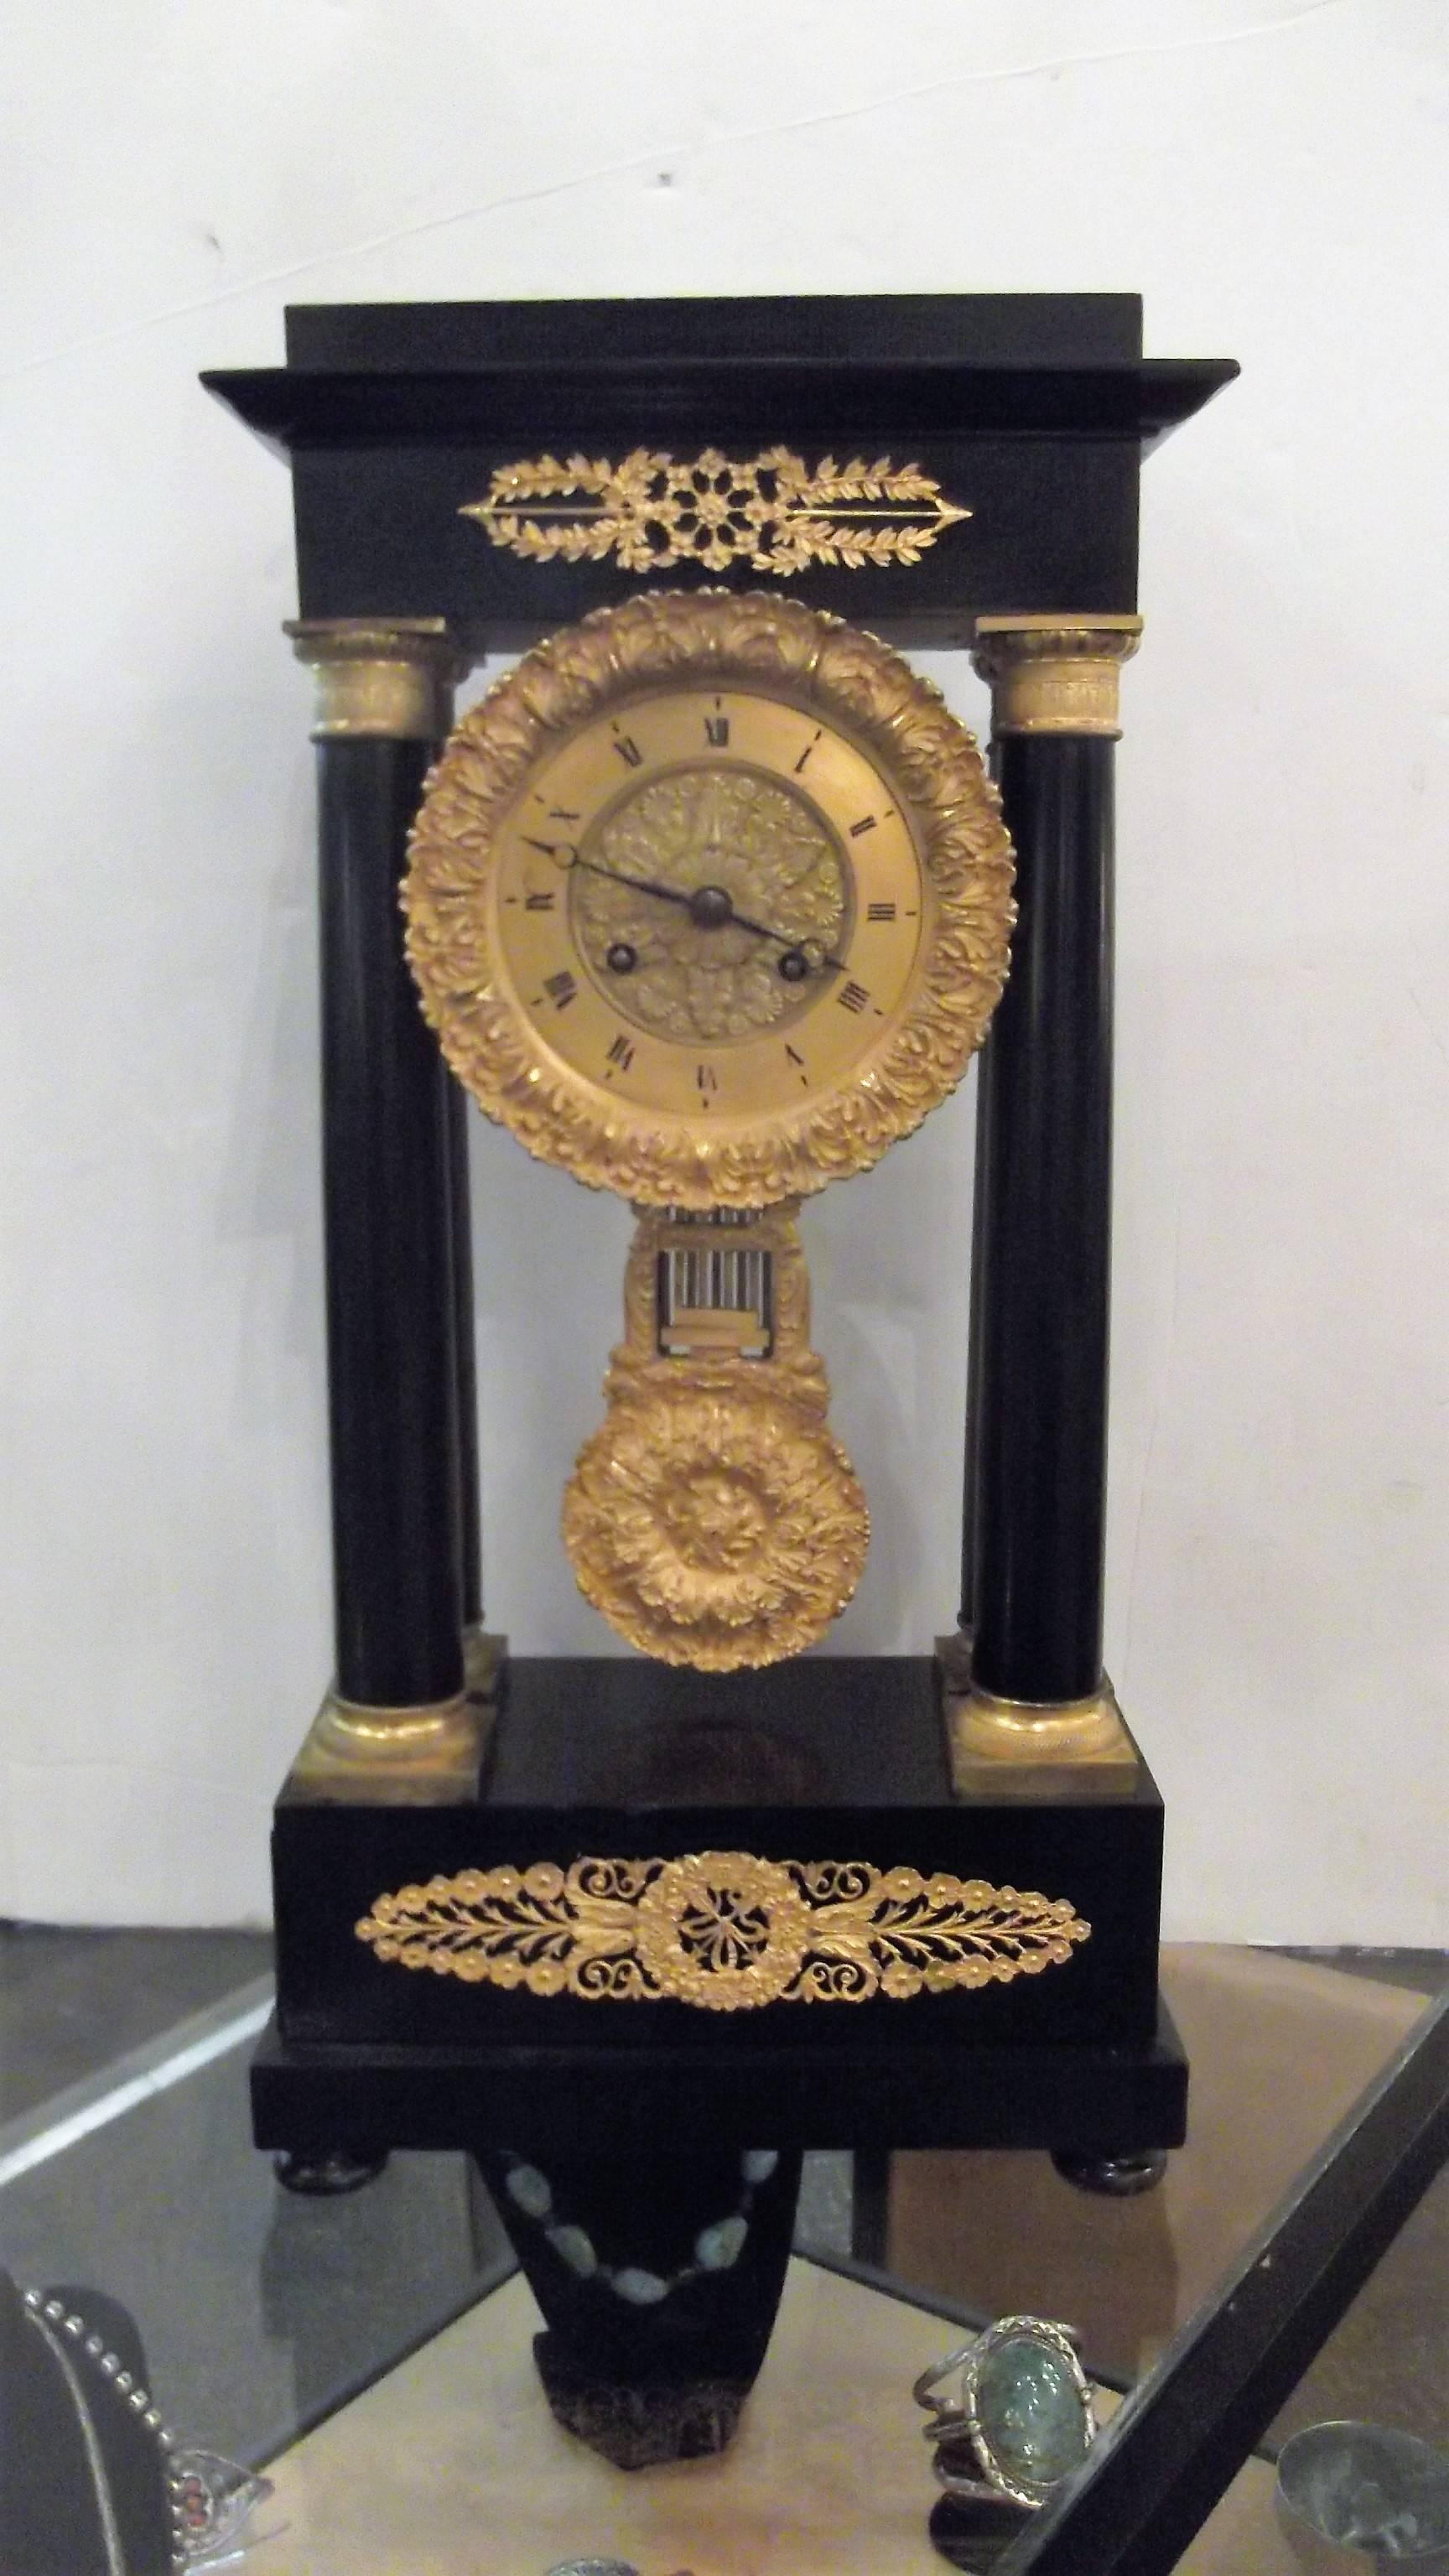 A classic French First Empire Block protico Clock, circa 1820 with beautifully cast original gilt bronze mounts on ebonized walnut. 
The four columns hold up the newly cleaned and serviced works with a magnificent original pendulum, the face of the